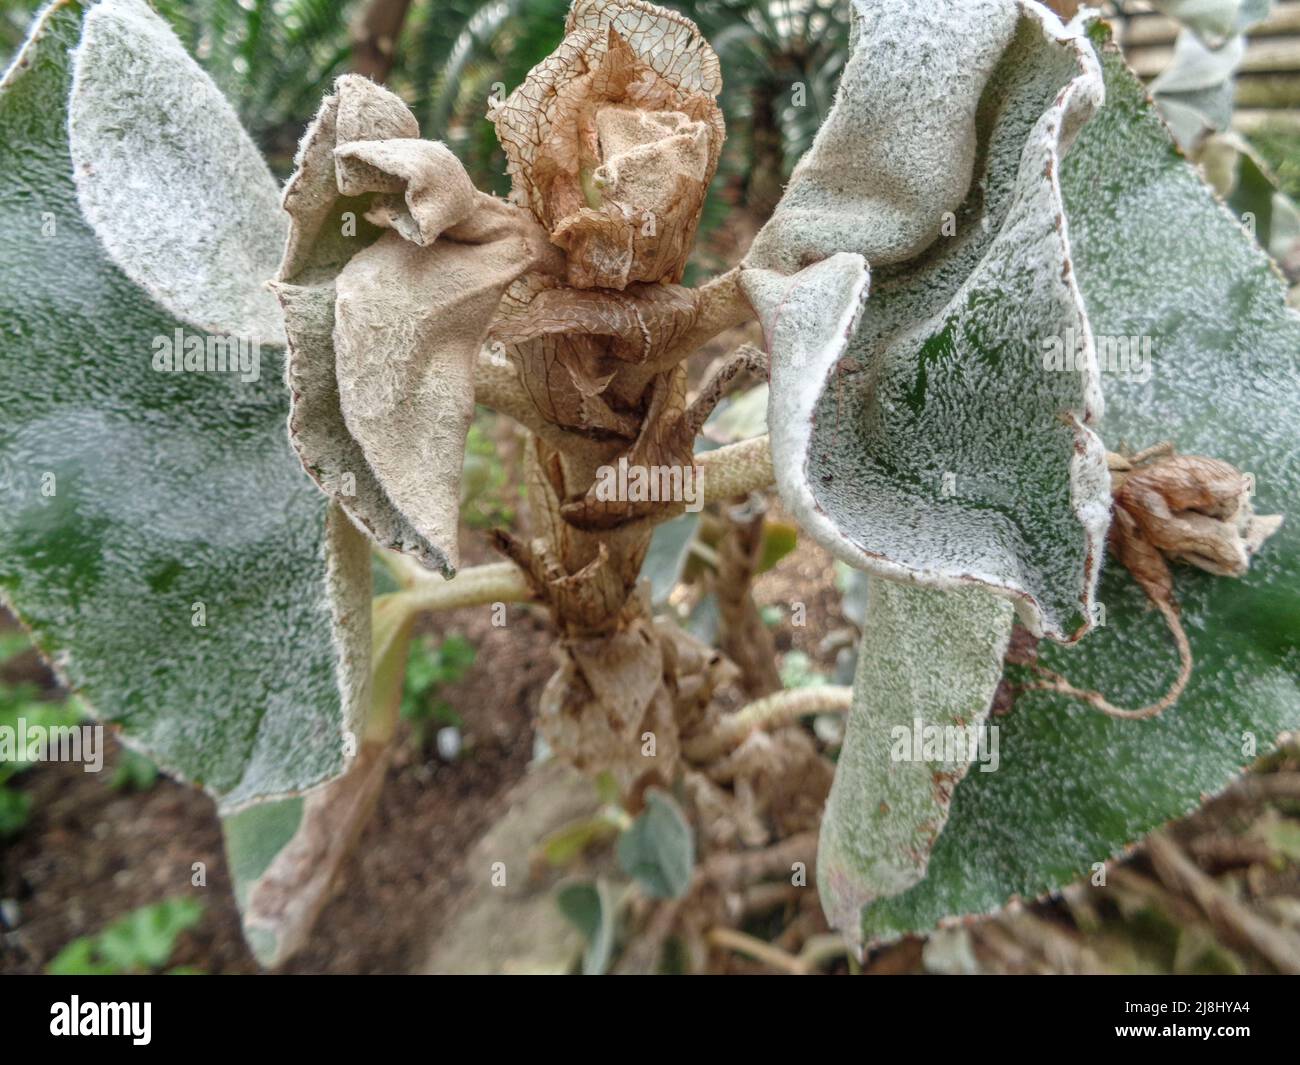 Statuesque Begonia venosa, veined begonia, plant portrait in close up Stock Photo